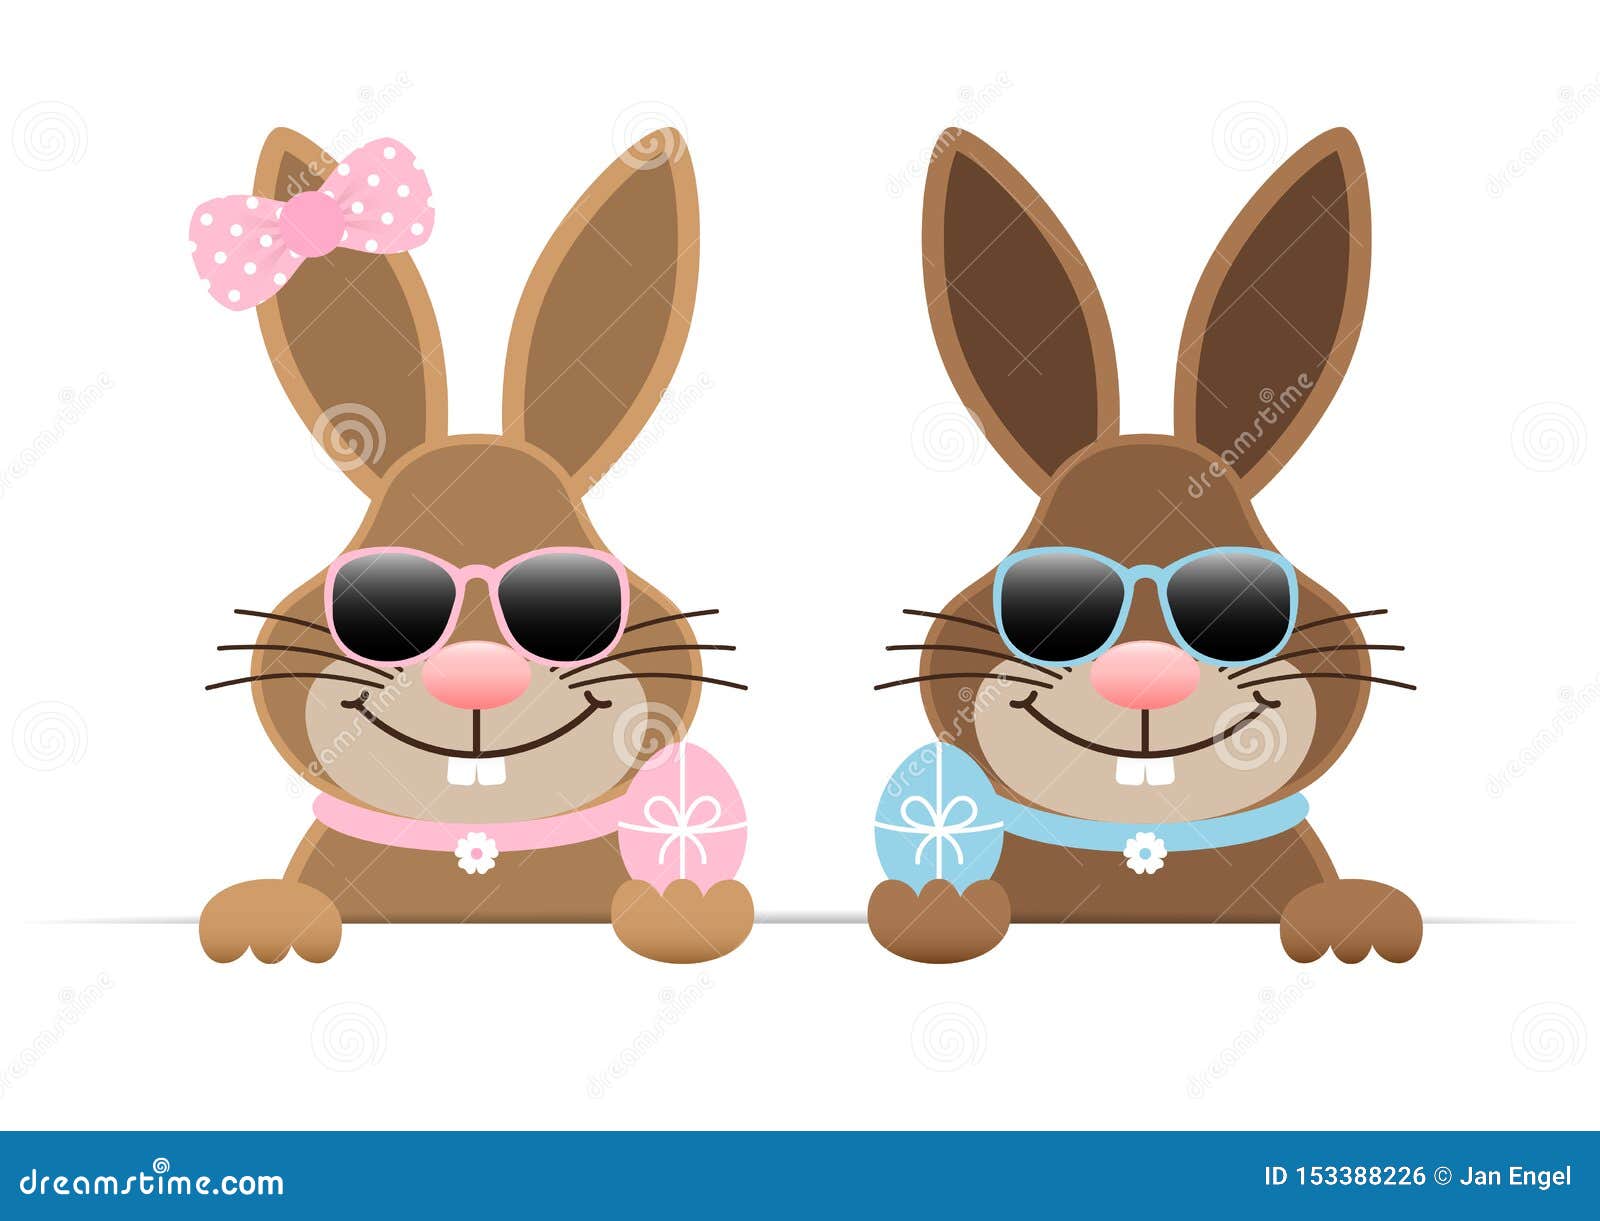 Red Easter Bunny Party Glasses Sunglasses Cartoon Rabbit Glasses for Easter Party Photo Props 